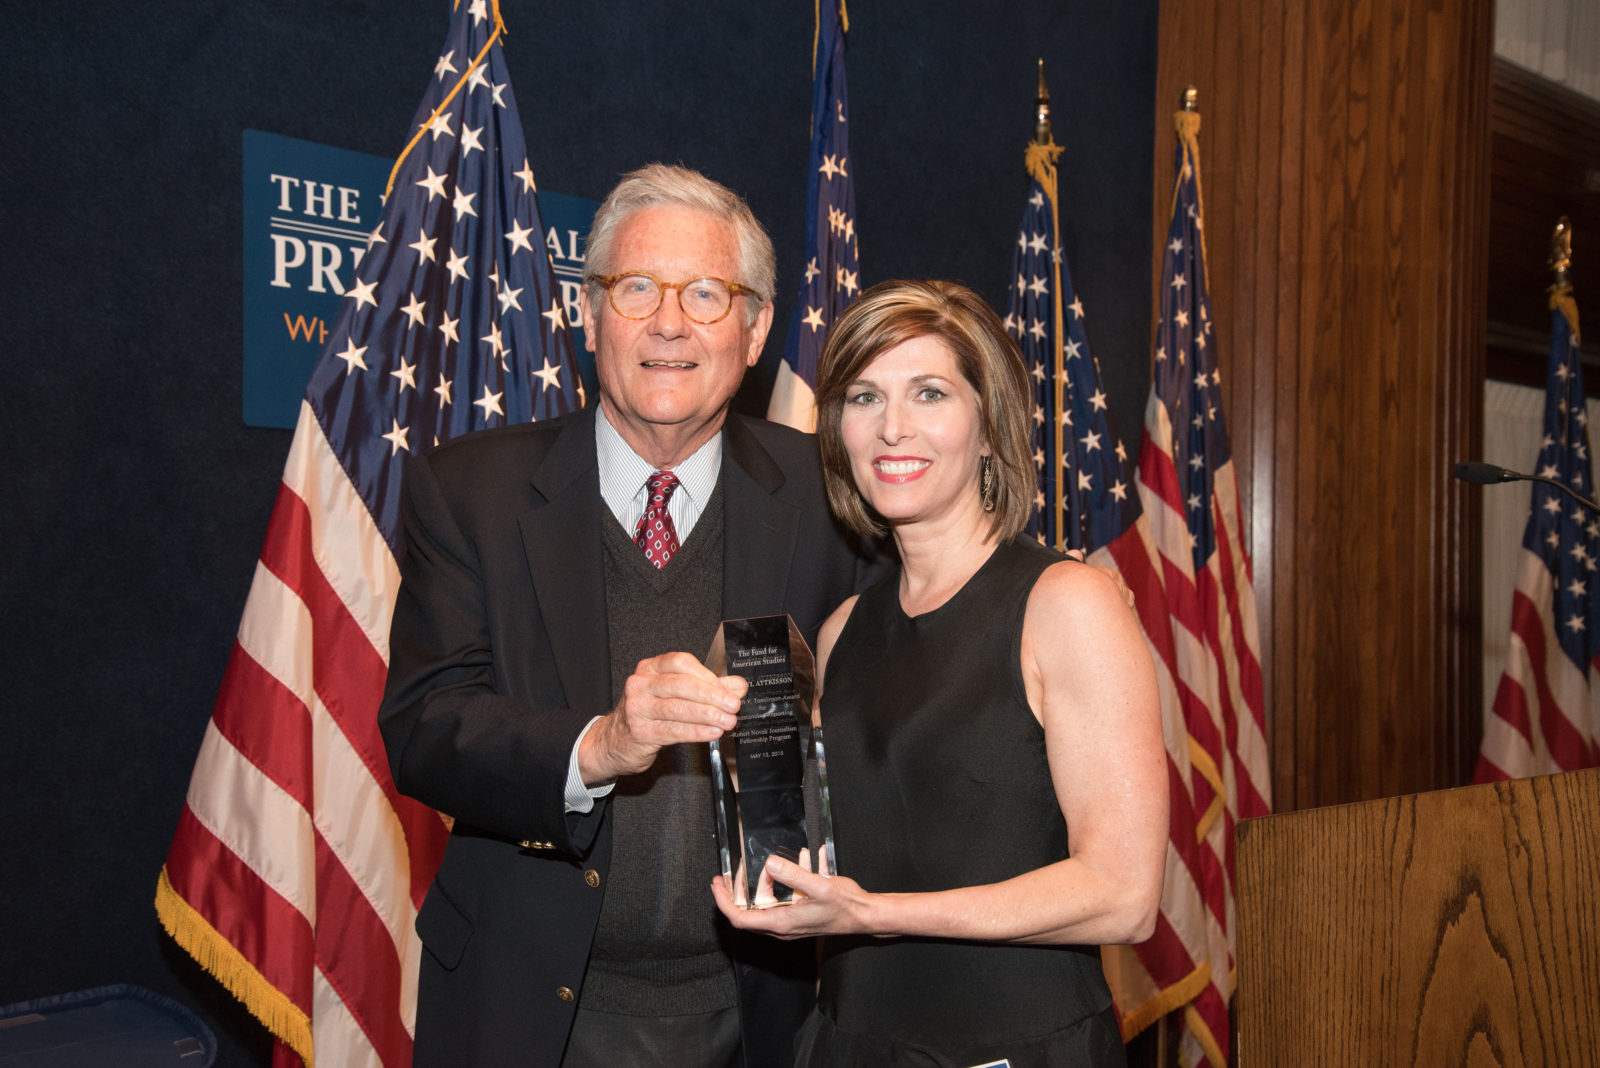 TFAS Trustee Fred Barnes of The Weekly Standard presents Sharyl Attkisson with the inaugural Kenneth Y. Tomlinson Award for Outstanding Reporting.